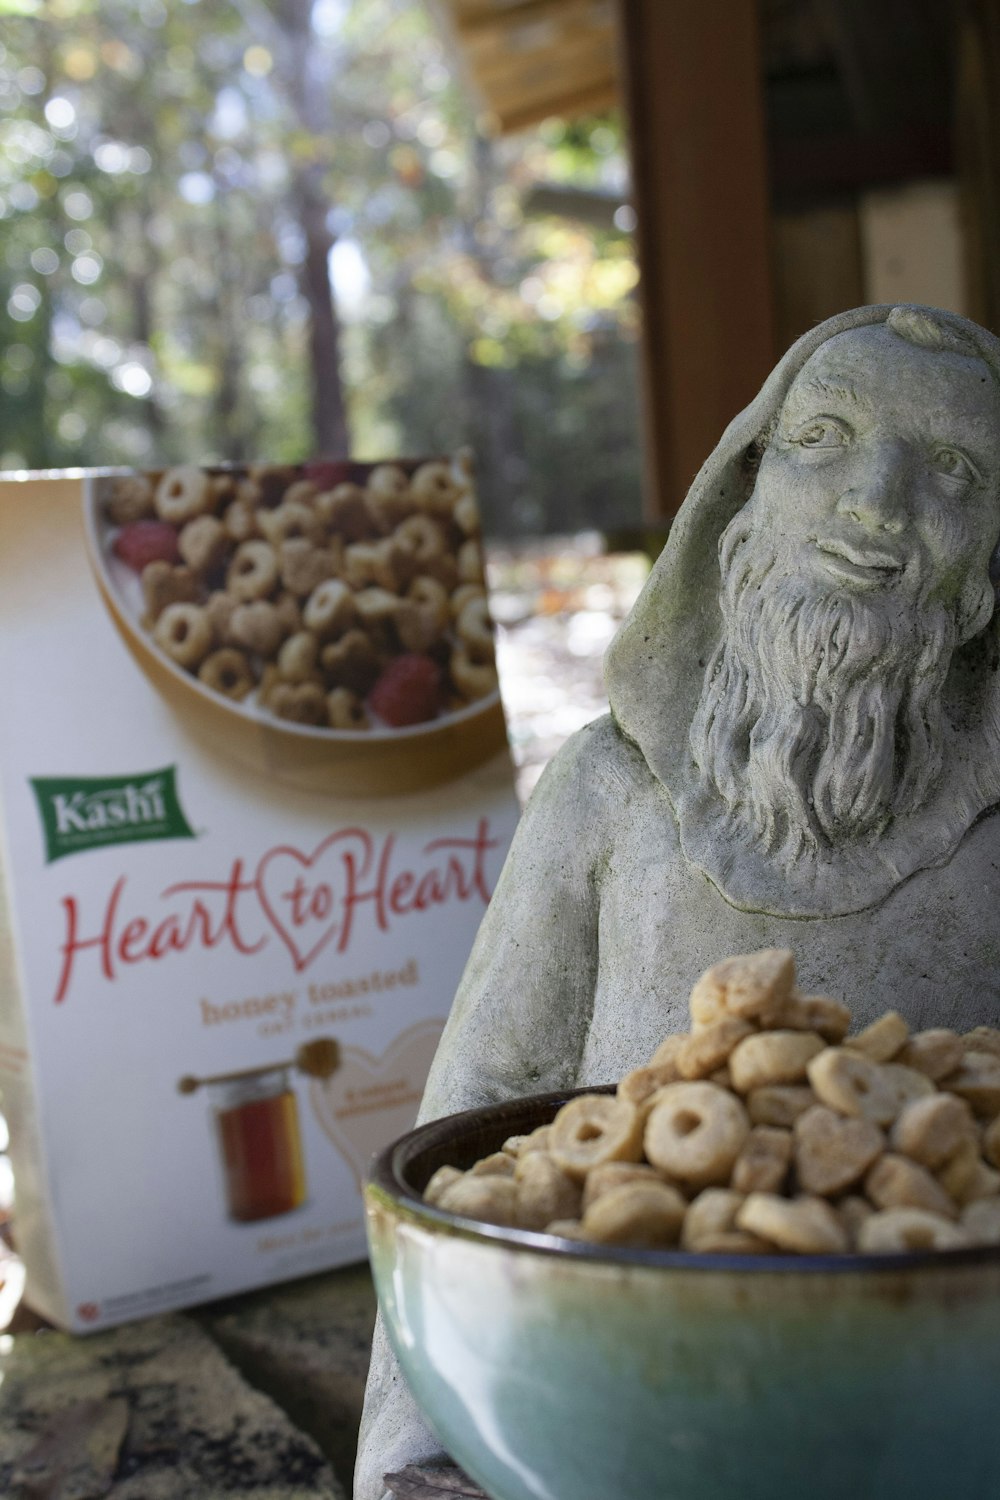 Heart to Heart cereal with box